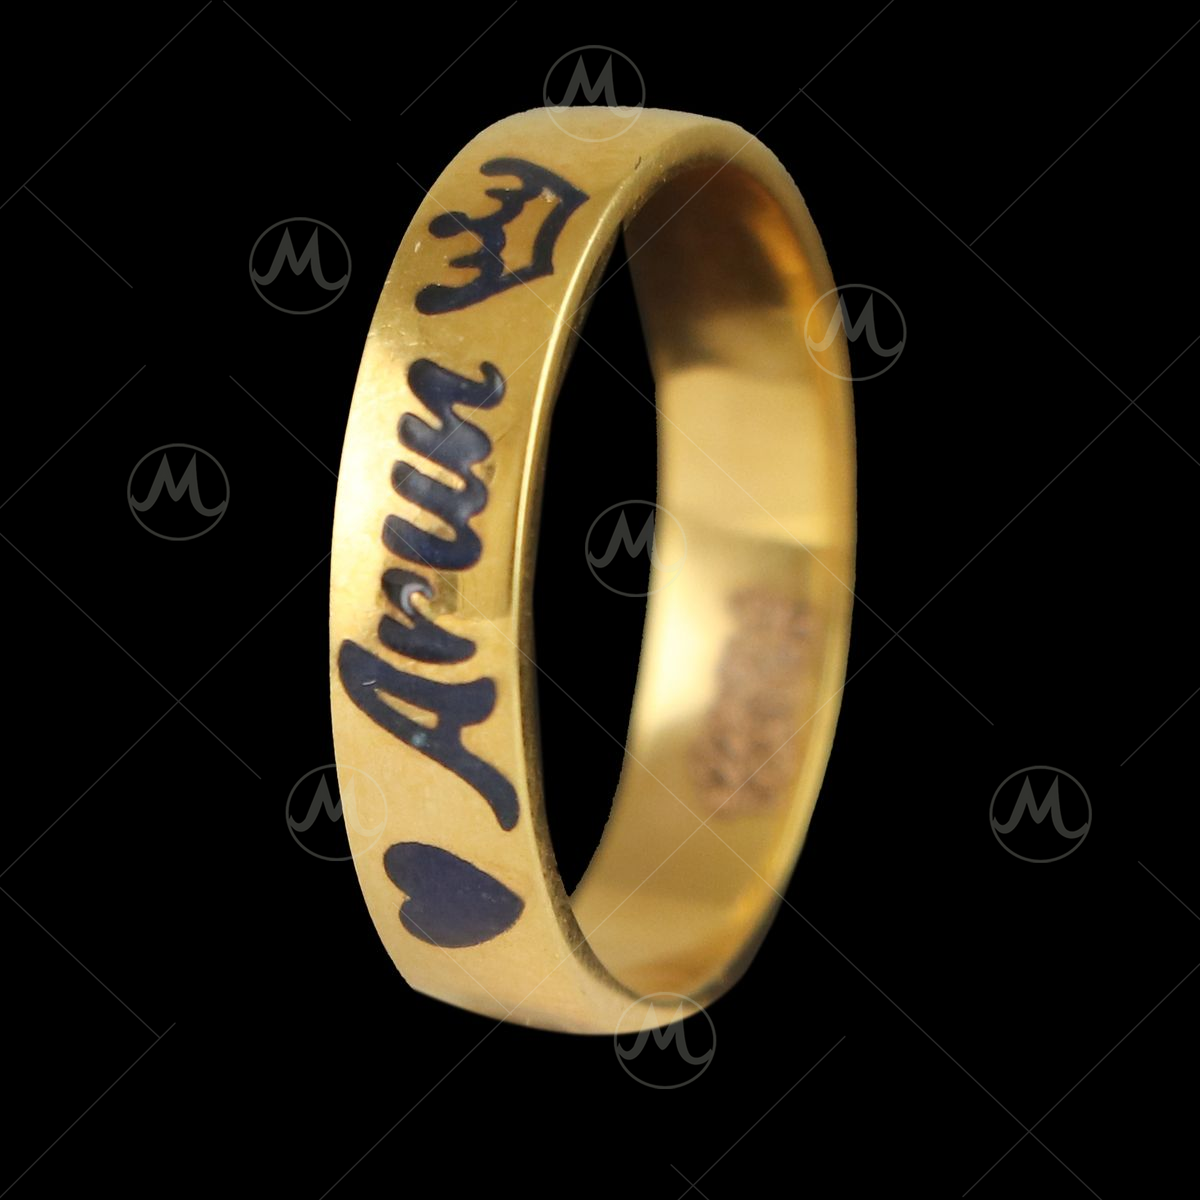 Buy Cute Customized Unisex Name Rings | yourPrint